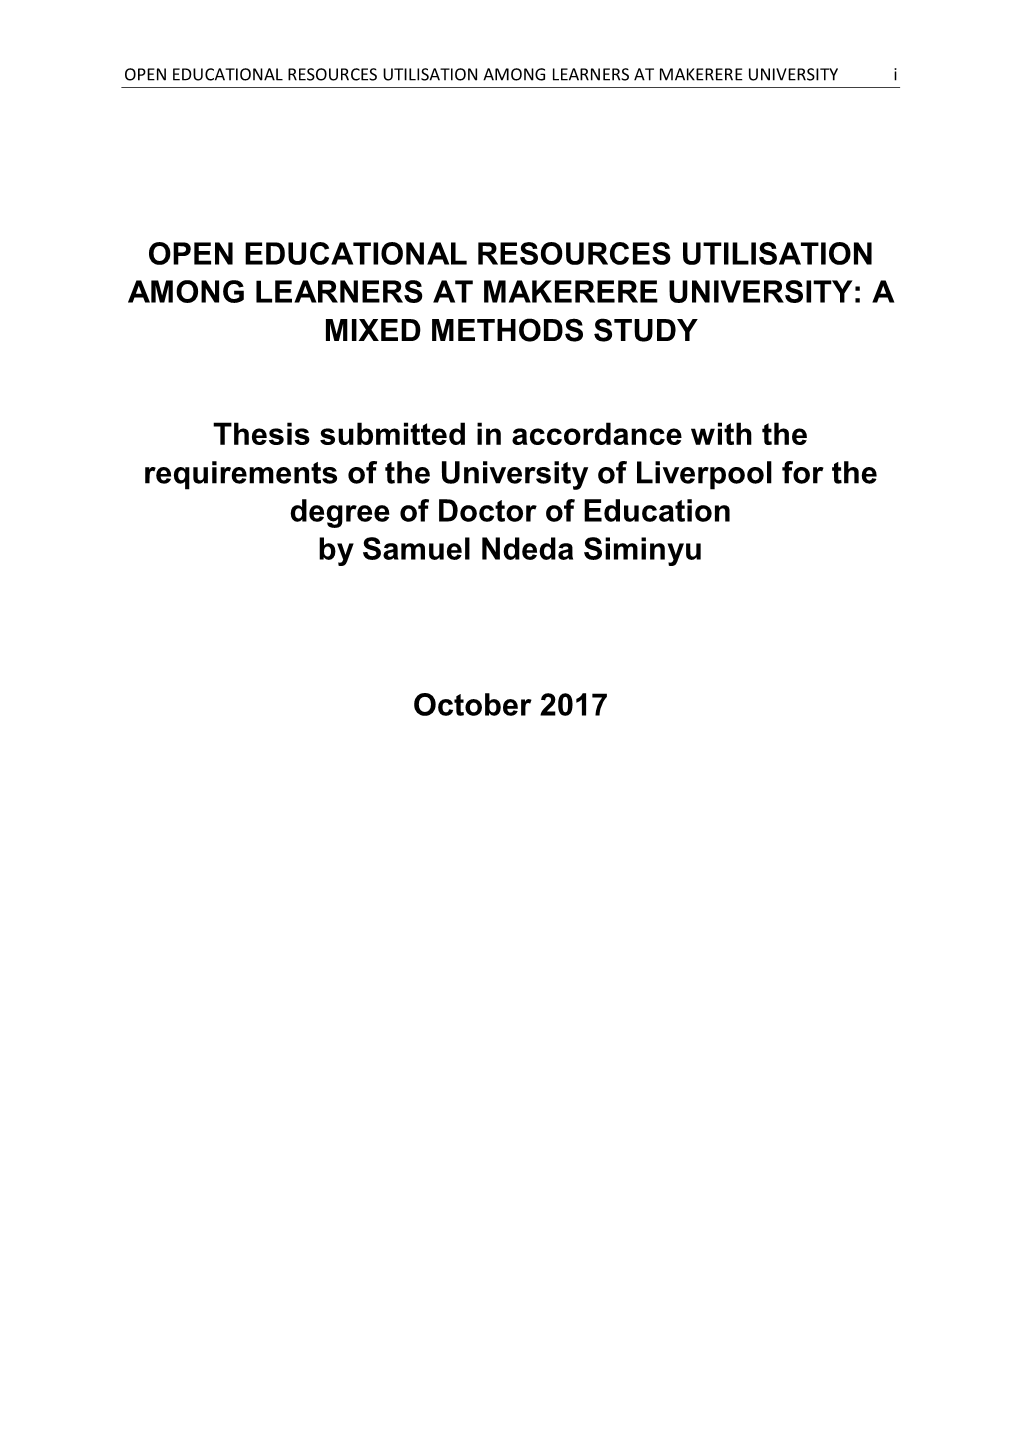 OPEN EDUCATIONAL RESOURCES UTILISATION AMONG LEARNERS at MAKERERE UNIVERSITY: a MIXED METHODS STUDY Thesis Submitted in Accordan